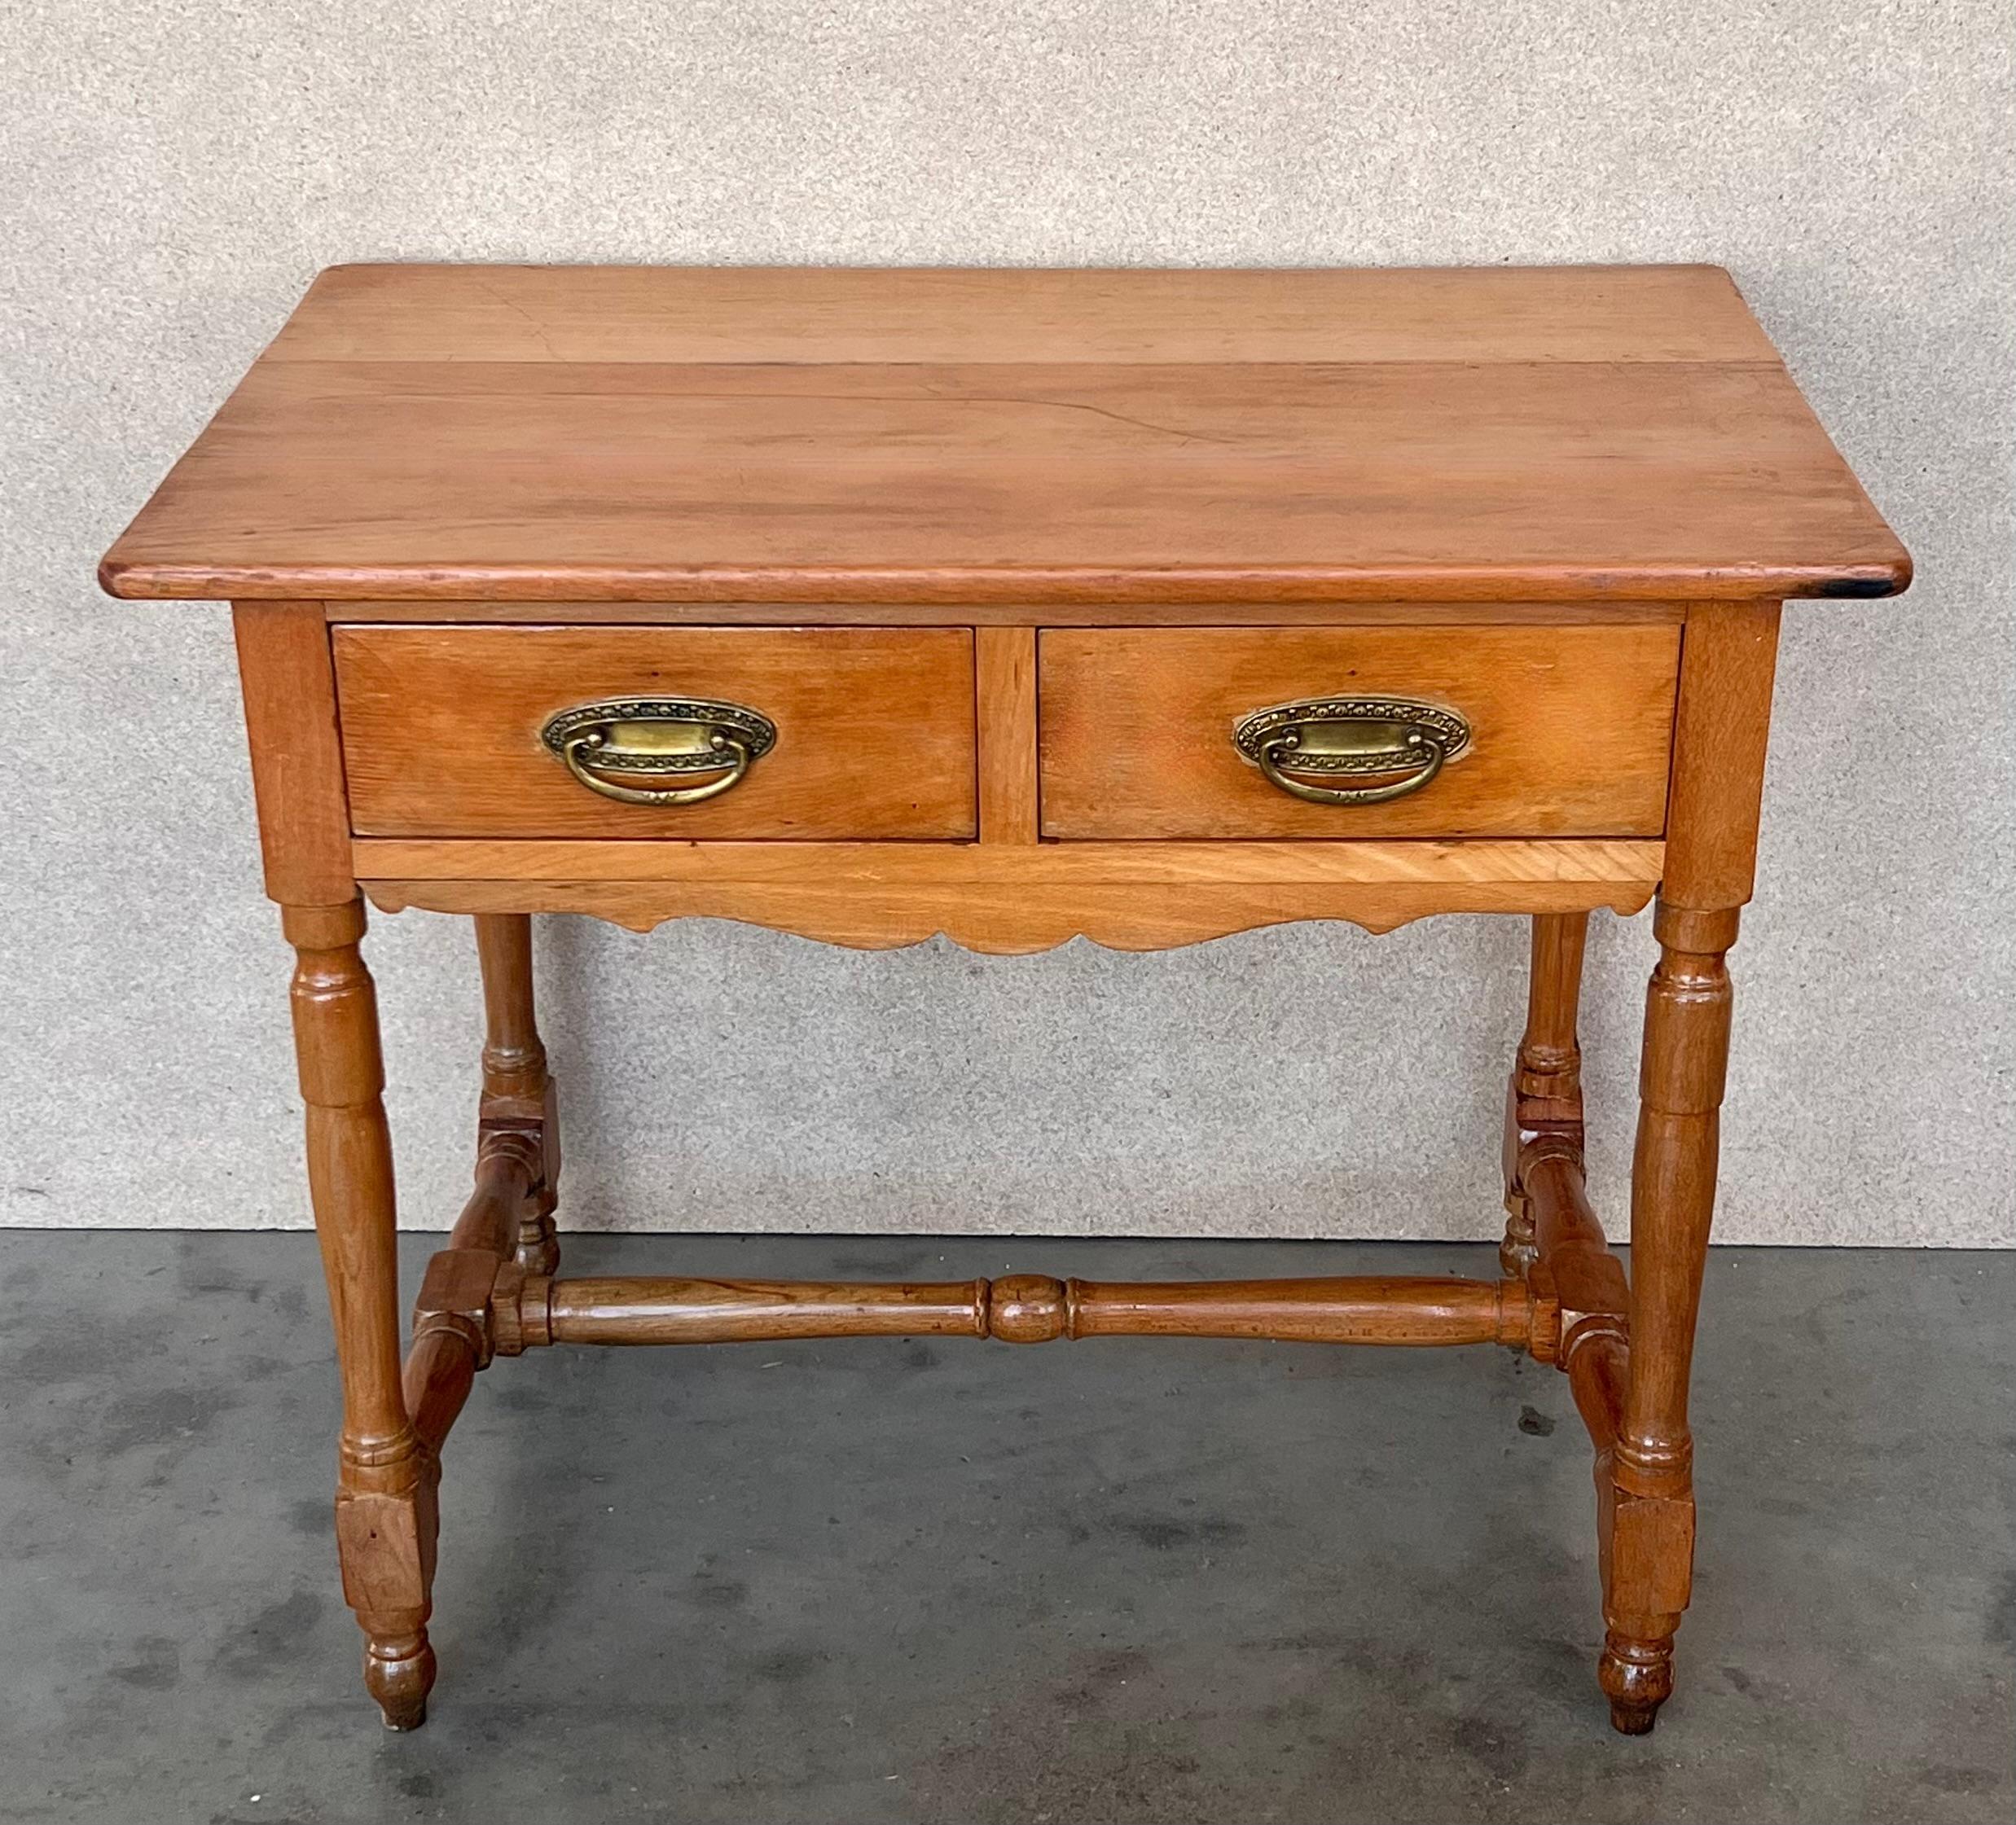 A charming early 20th century Spanish pine farm table with four tapered legs and a wonderfully well-worn finish from a century of use. Table works well for dining, but can also be used as a little desk or butcher block

